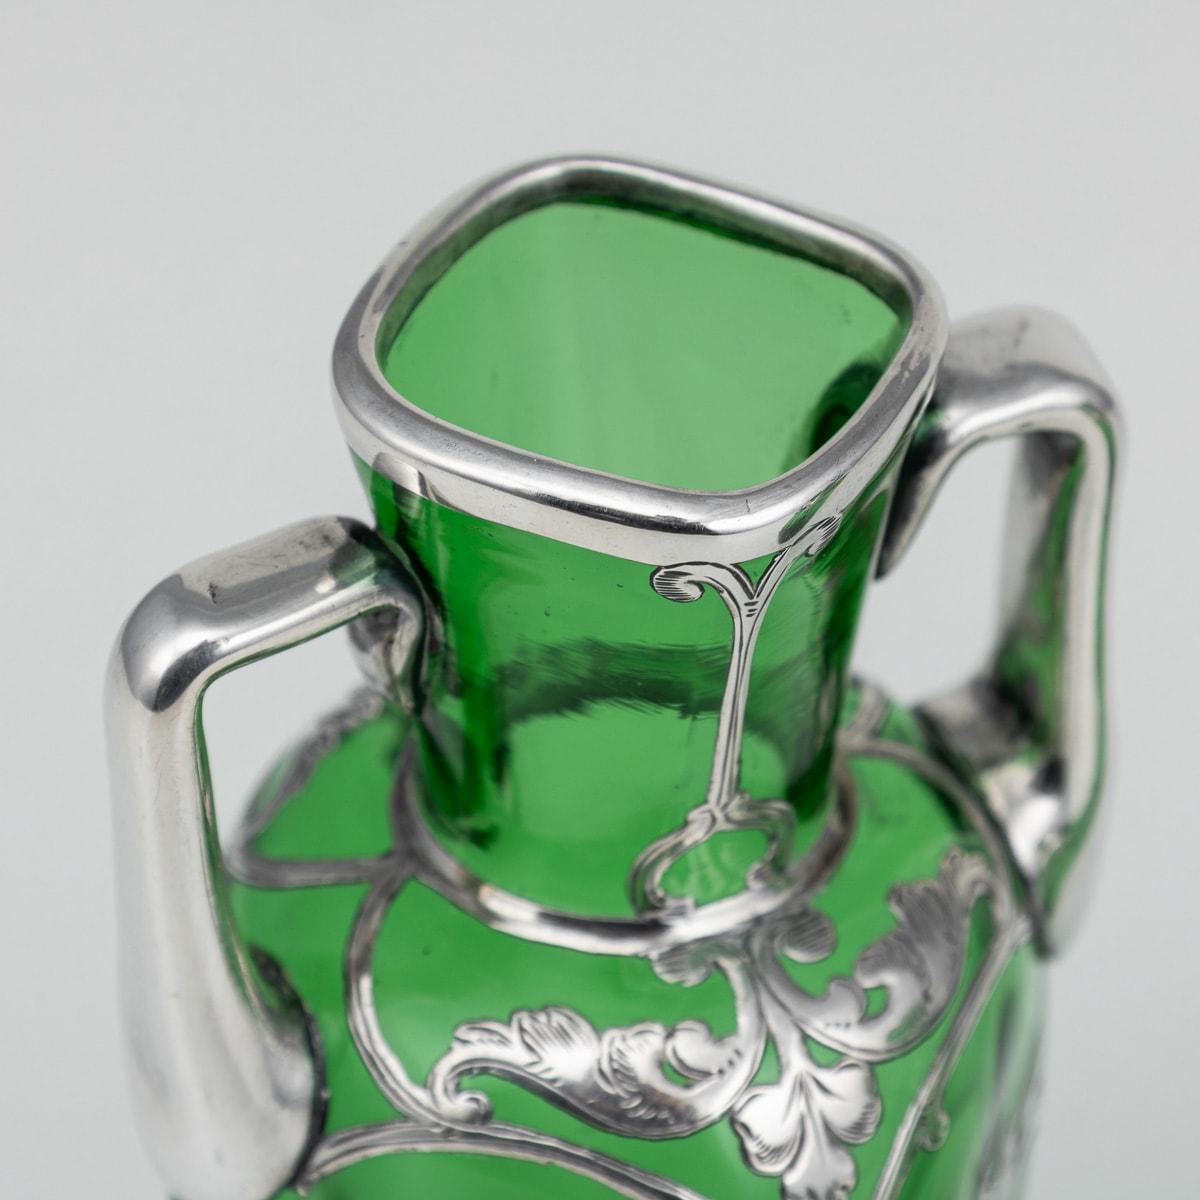 20th Century American Pair Of Green Glass Vases With Silver Overlay c.1920 For Sale 2